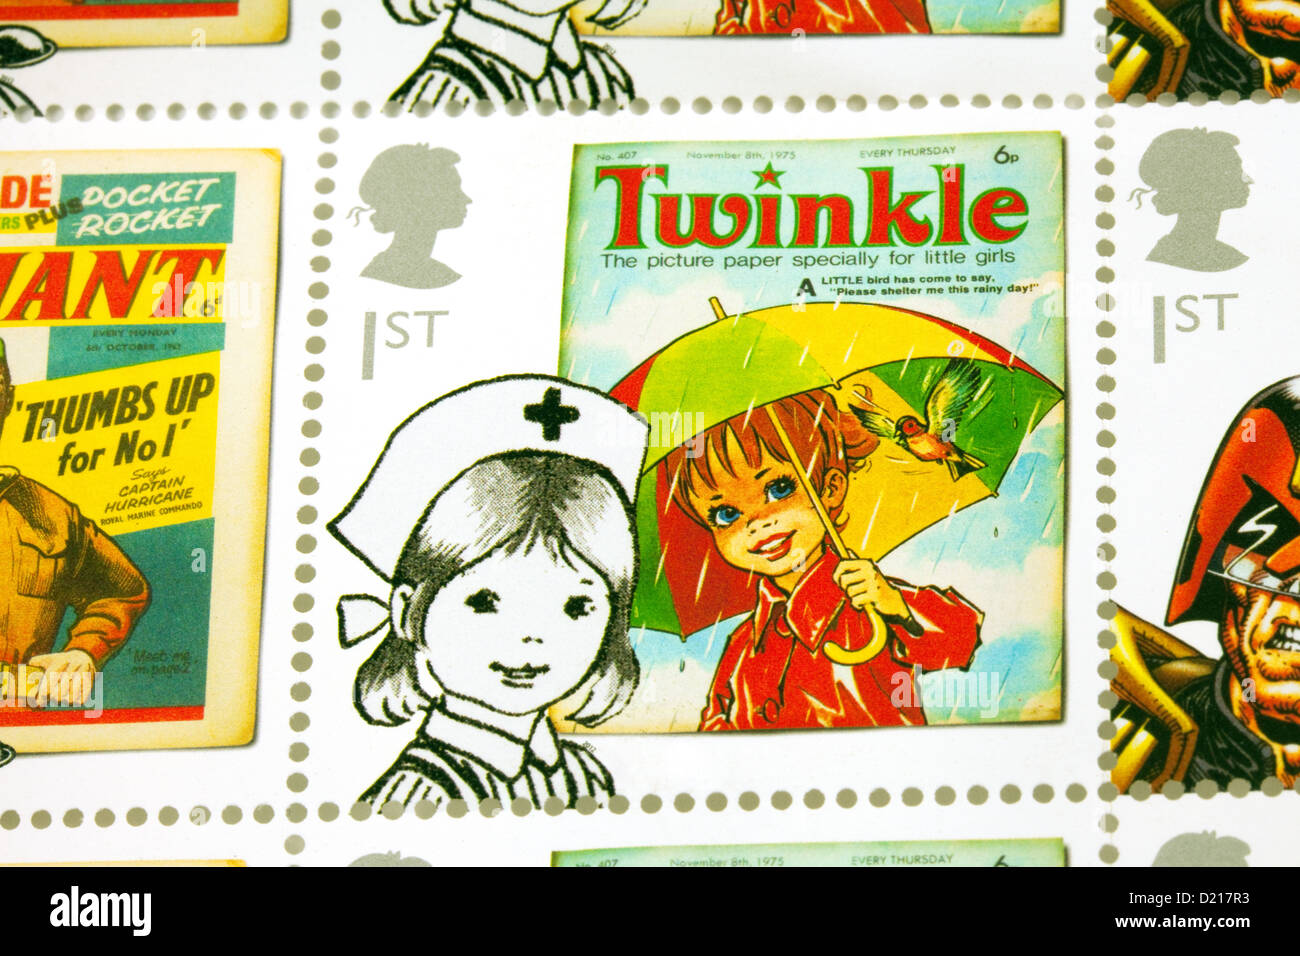 2014 Classic Childrens TV mint postage stamps 12 x 1st Class Royal Mail self-adhesive stamps